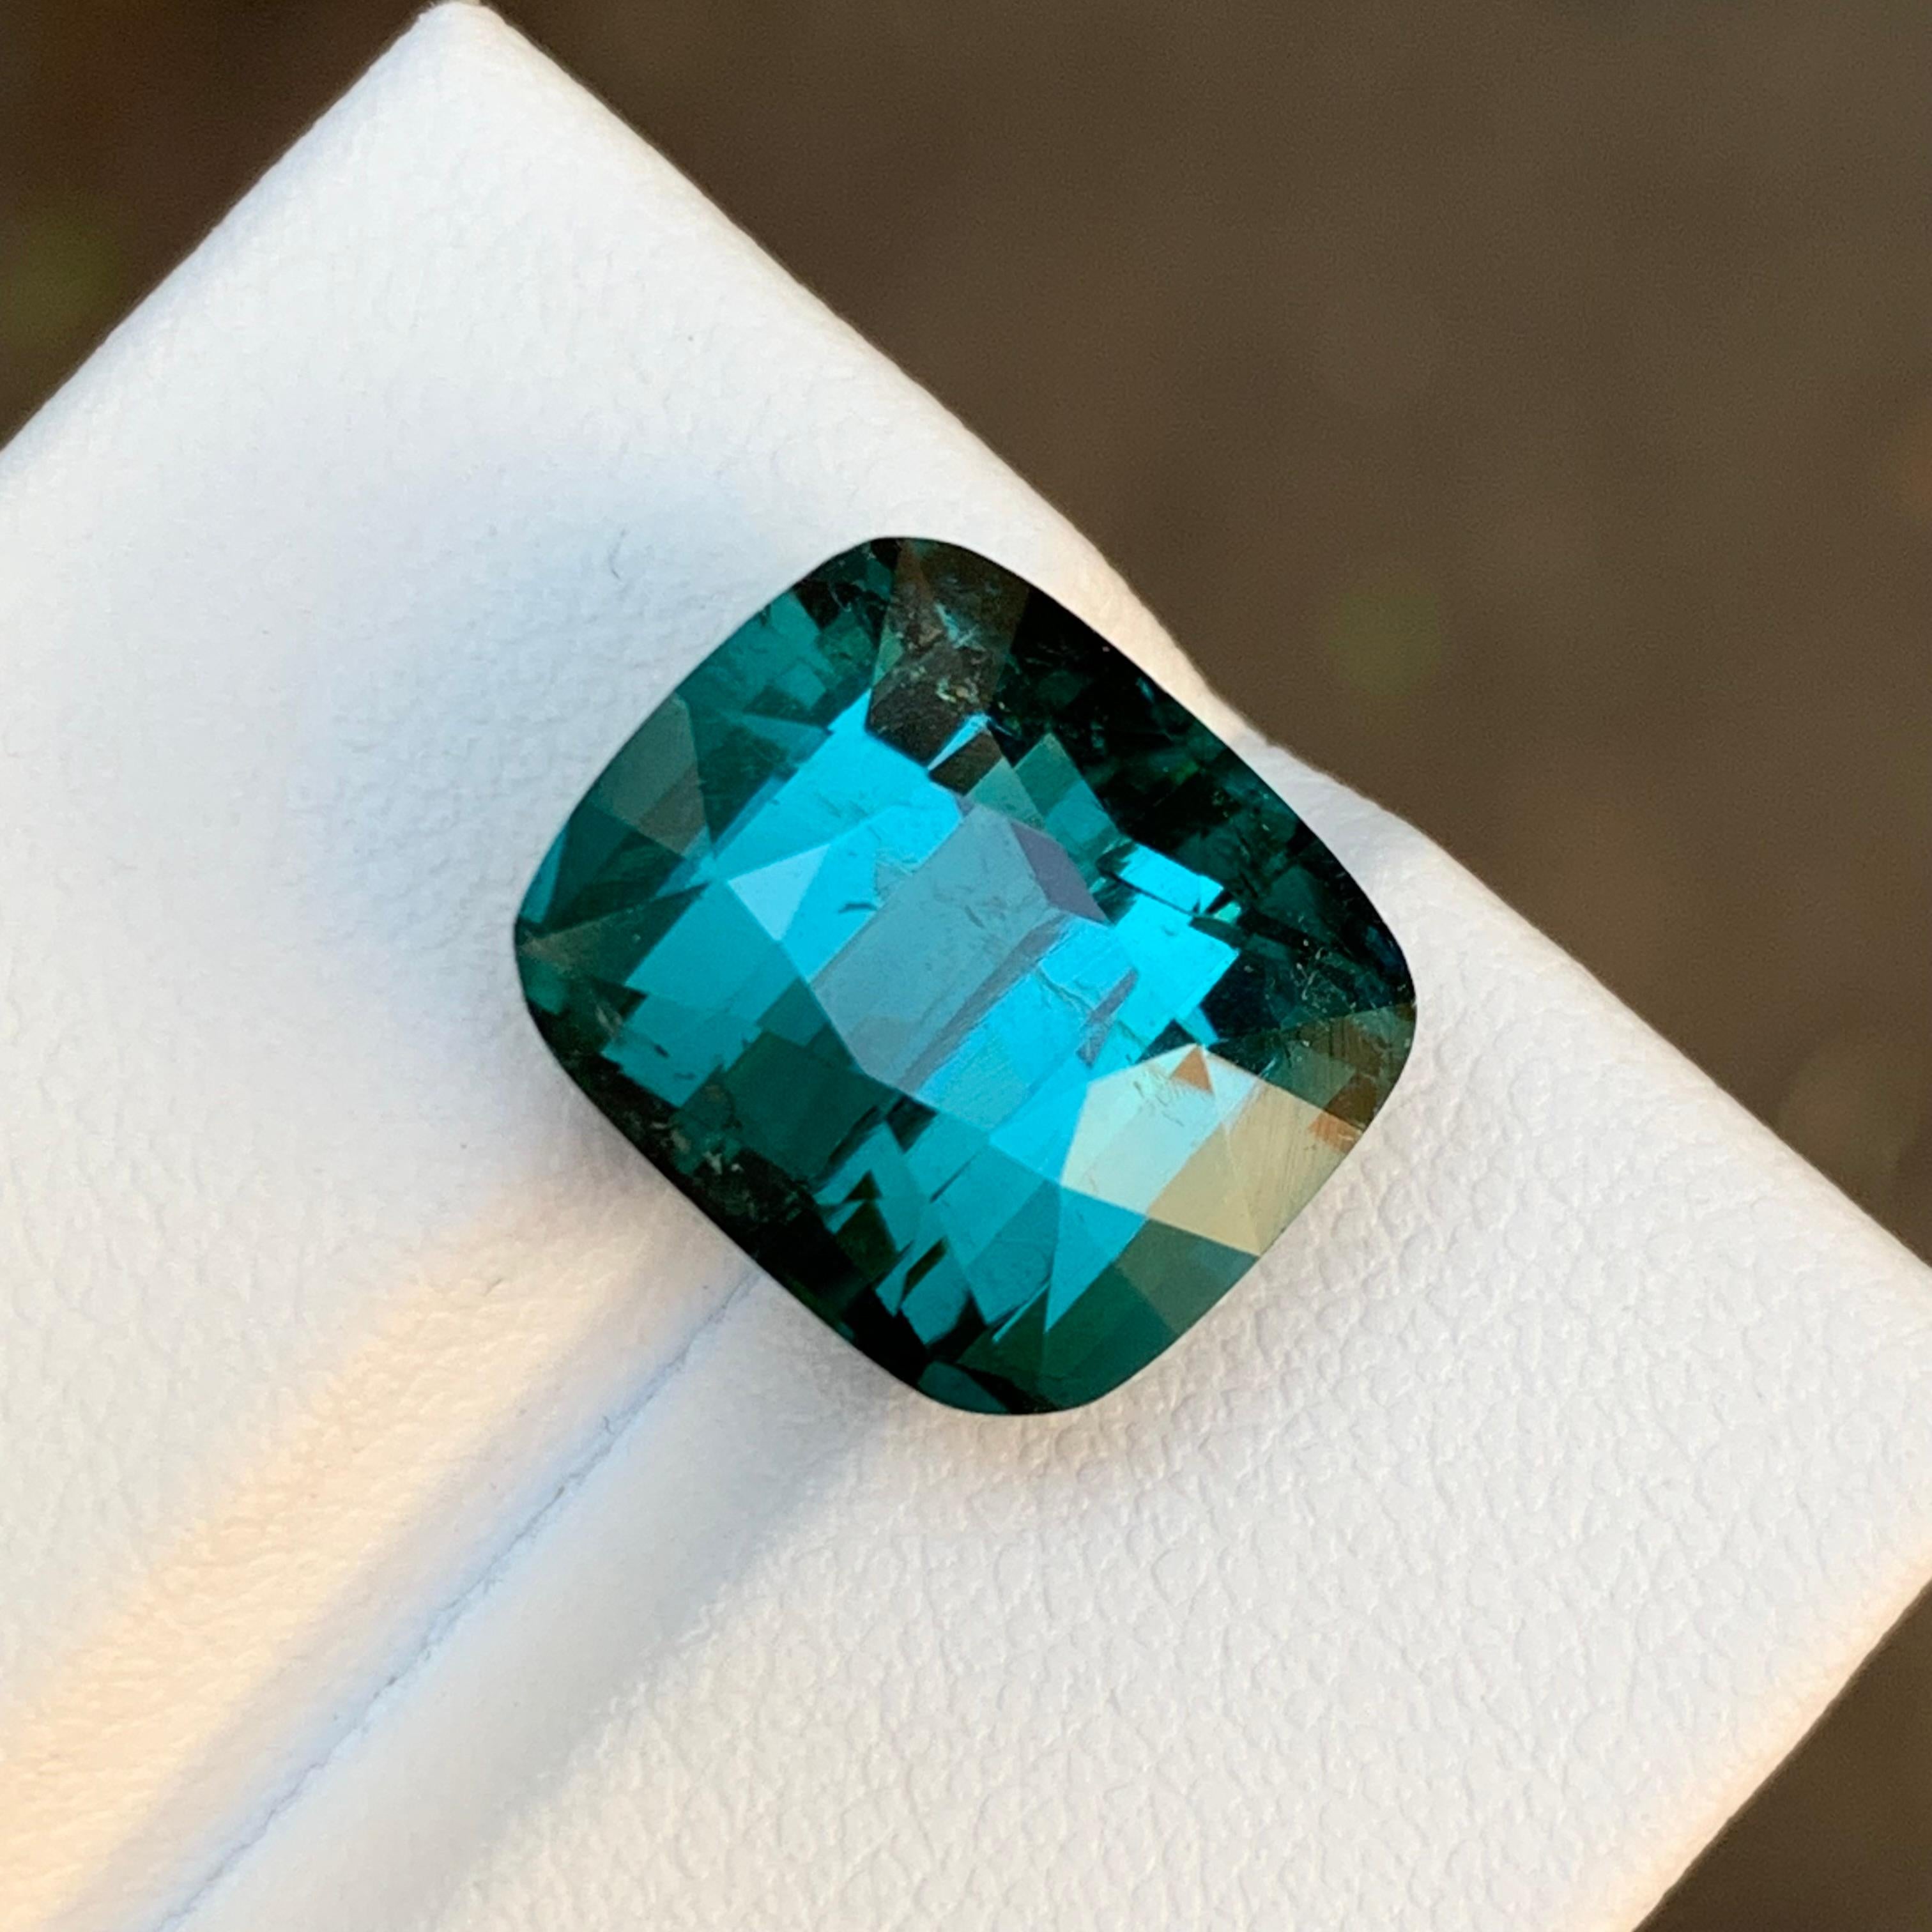 GEMSTONE TYPE: Tourmaline
PIECE(S): 1
WEIGHT: 9.20 Carats
SHAPE: Cushion Cut
SIZE (MM): 10.93 x 12.68 x 8.91
COLOR: Greenish Teal Blue
CLARITY: Slightly Included 
TREATMENT: None
ORIGIN: Afghanistan 🇦🇫 
CERTIFICATE: On demand
(if you require a